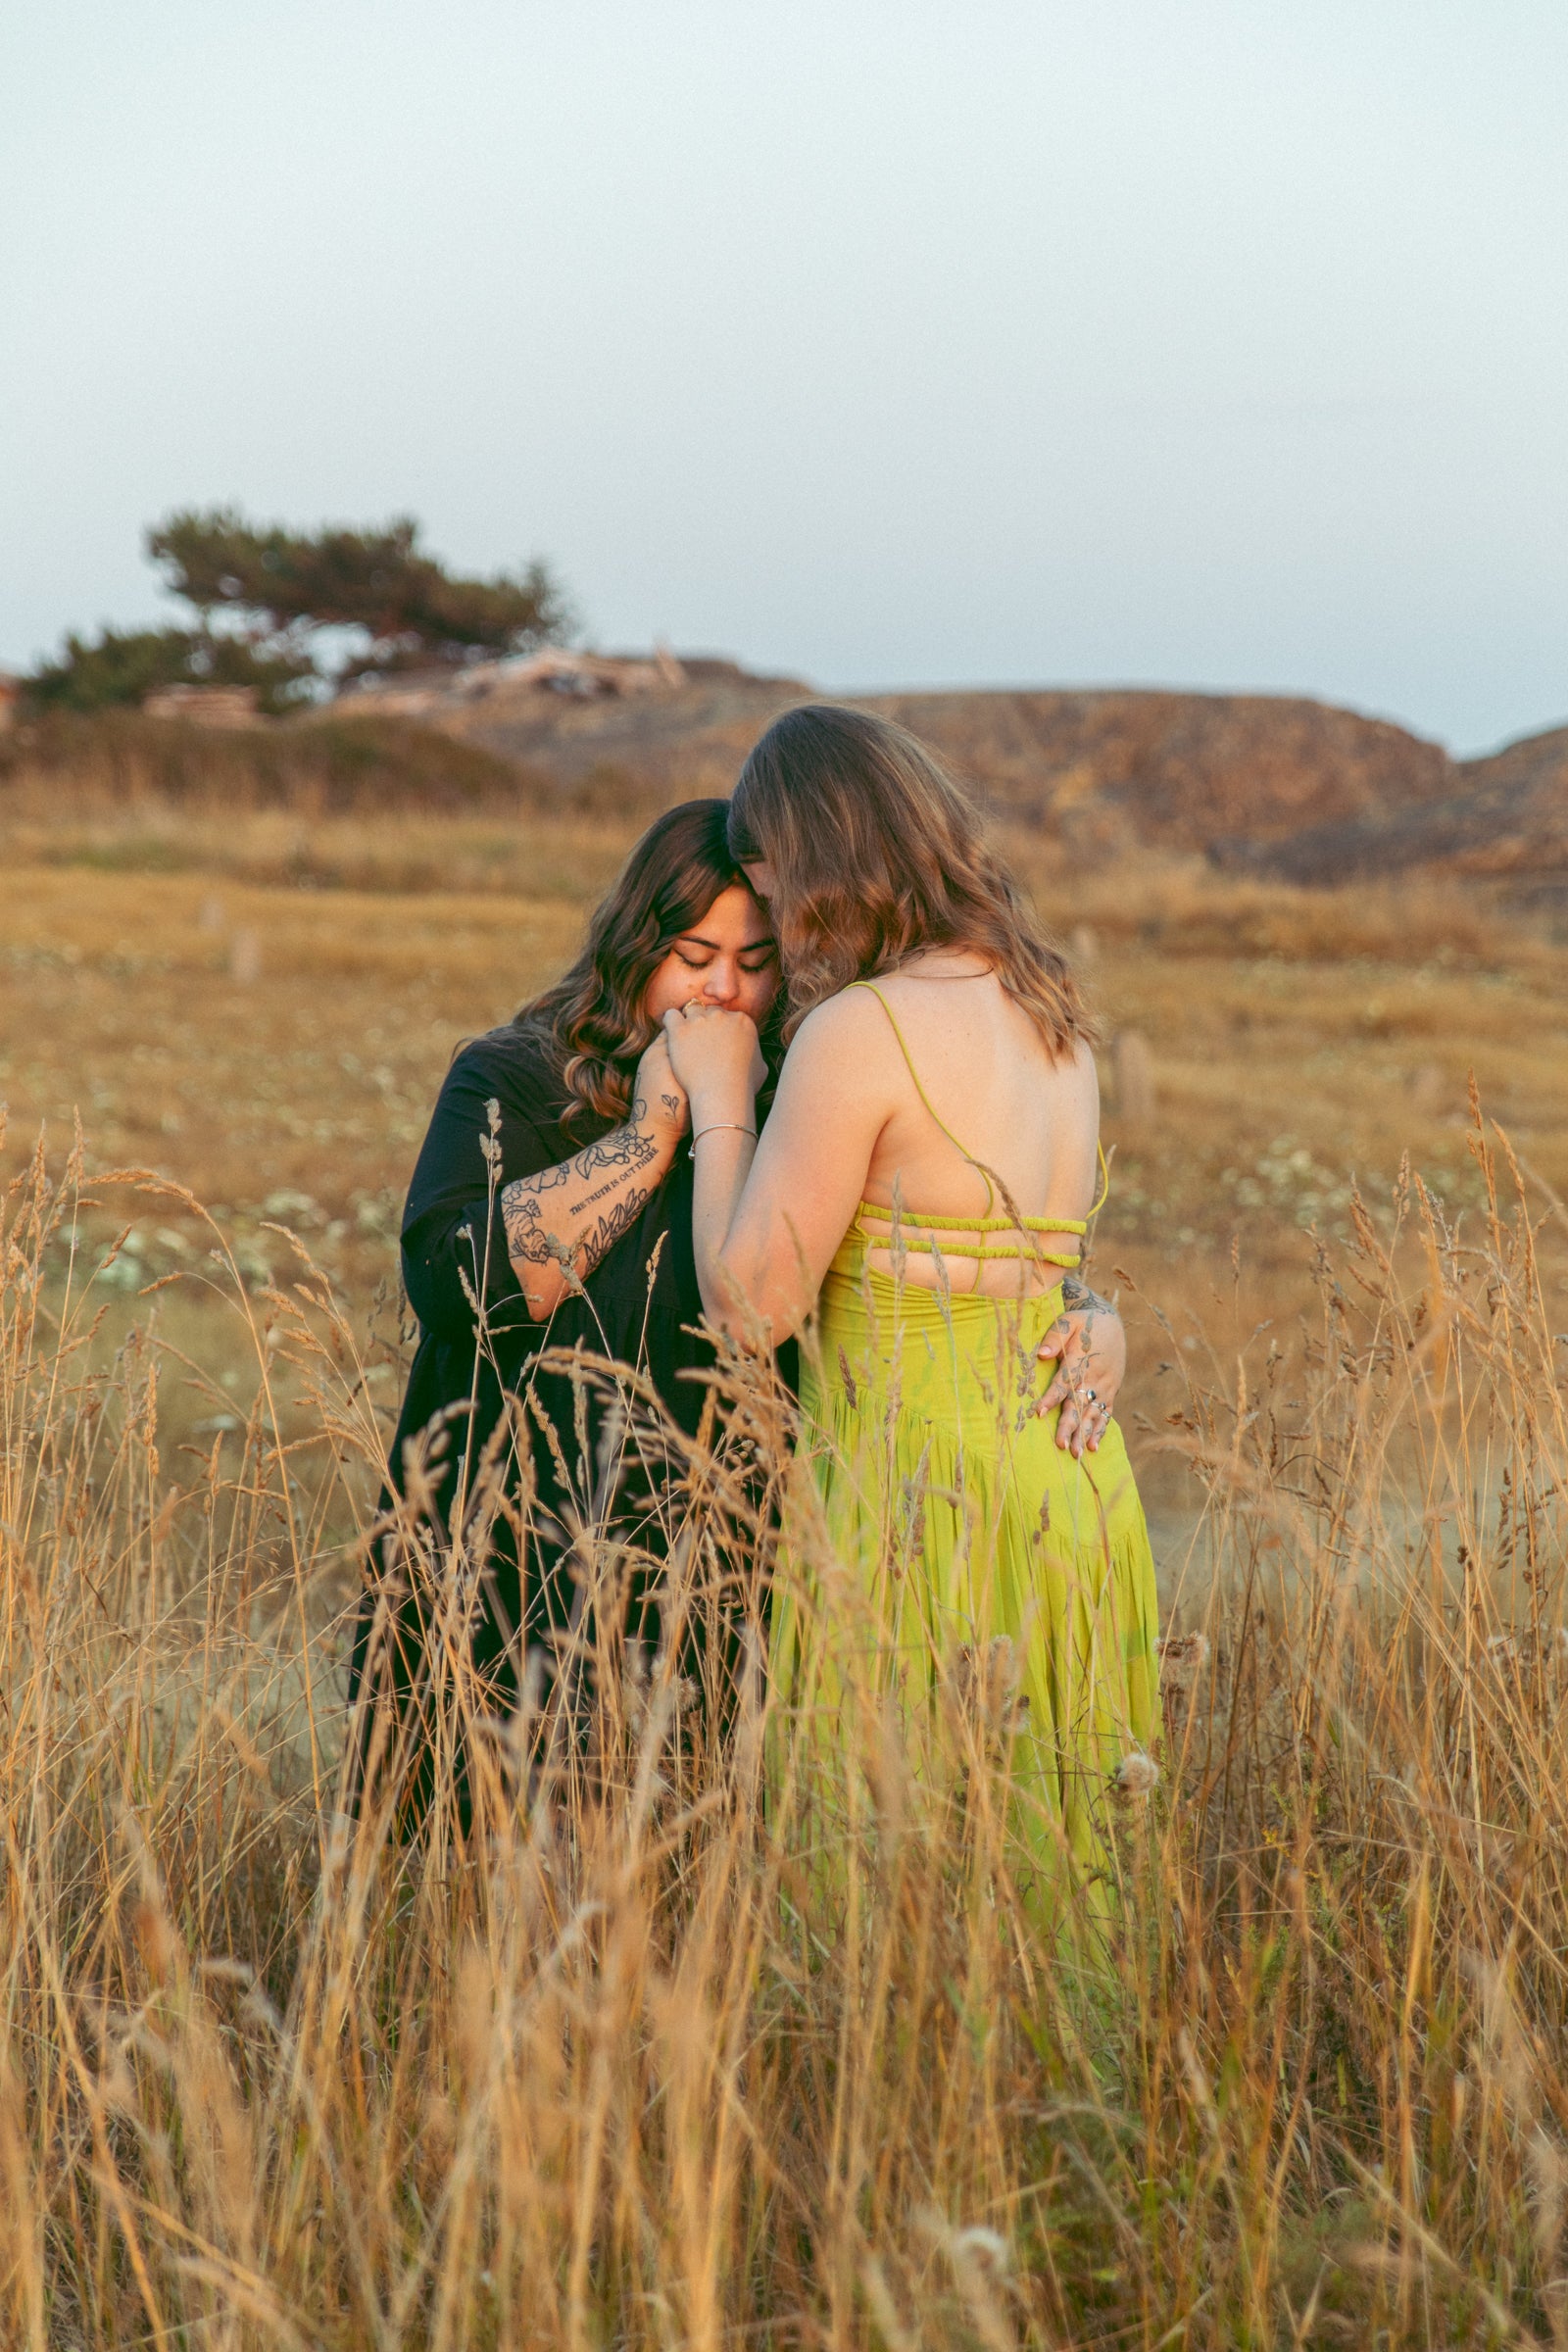 Series of photographs capturing Yolanda and Zoe embracing in a field of tall grass, their love evident in each shot. Against the backdrop of nature, their bond shines through in tender embraces and shared moments. Photography by Bertie, specializing in capturing authentic connections and emotions in Victoria's scenic landscapes.